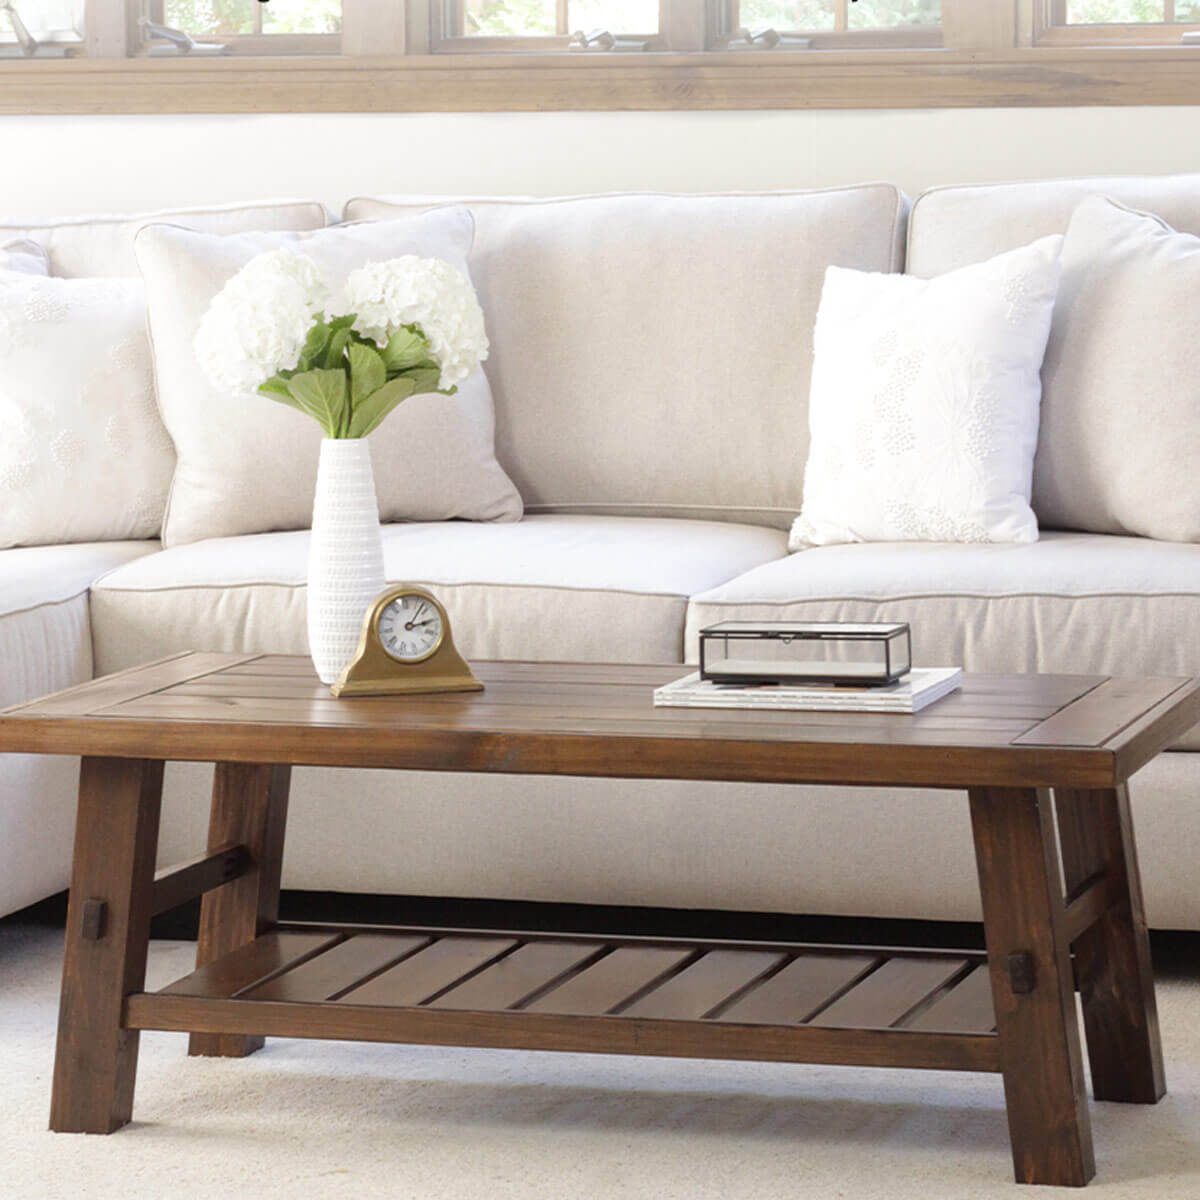 12 DIY Coffee Table Ideas and Designs (2022)